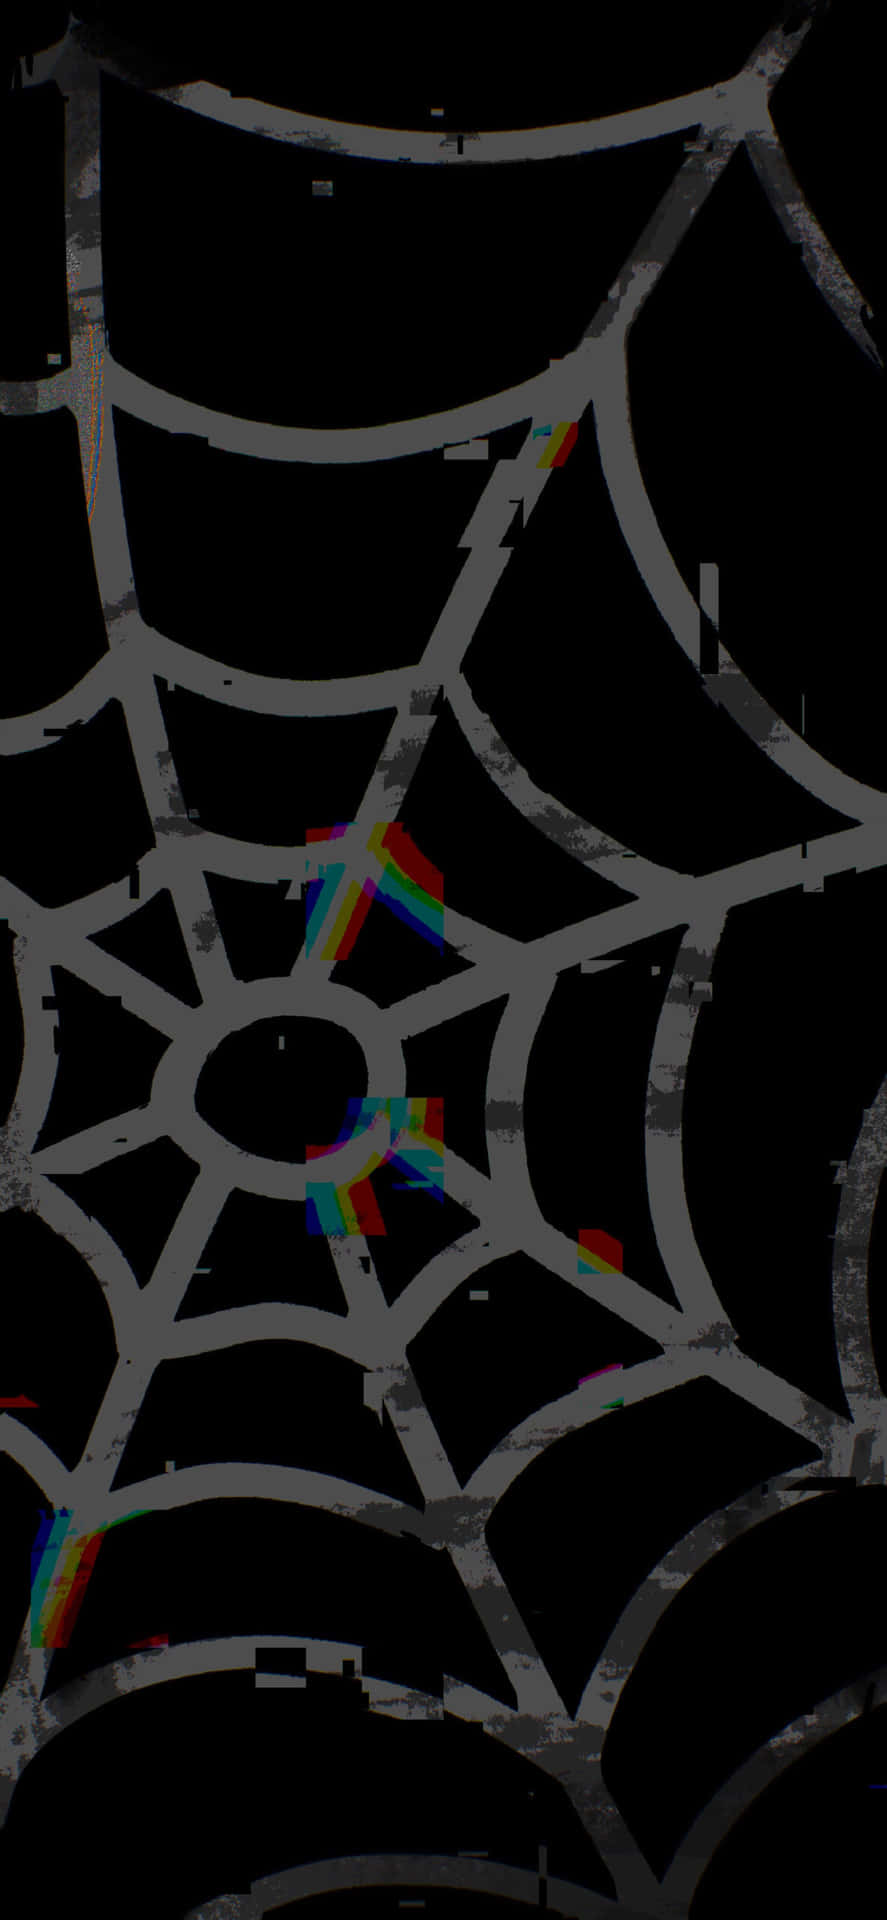 a spider web with rainbow colors